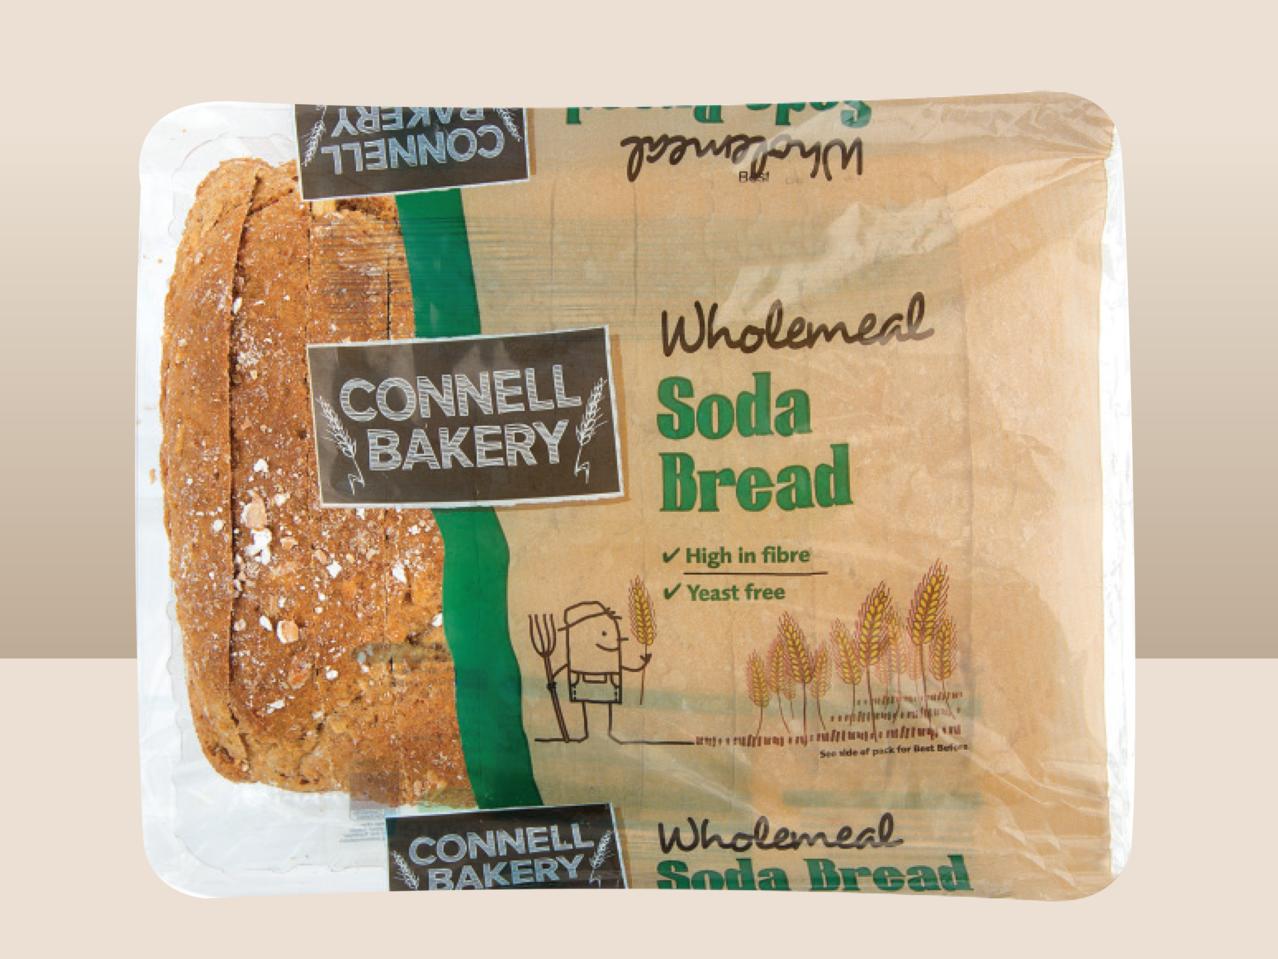 CONNELL BAKERY Wholemeal Soda Bread